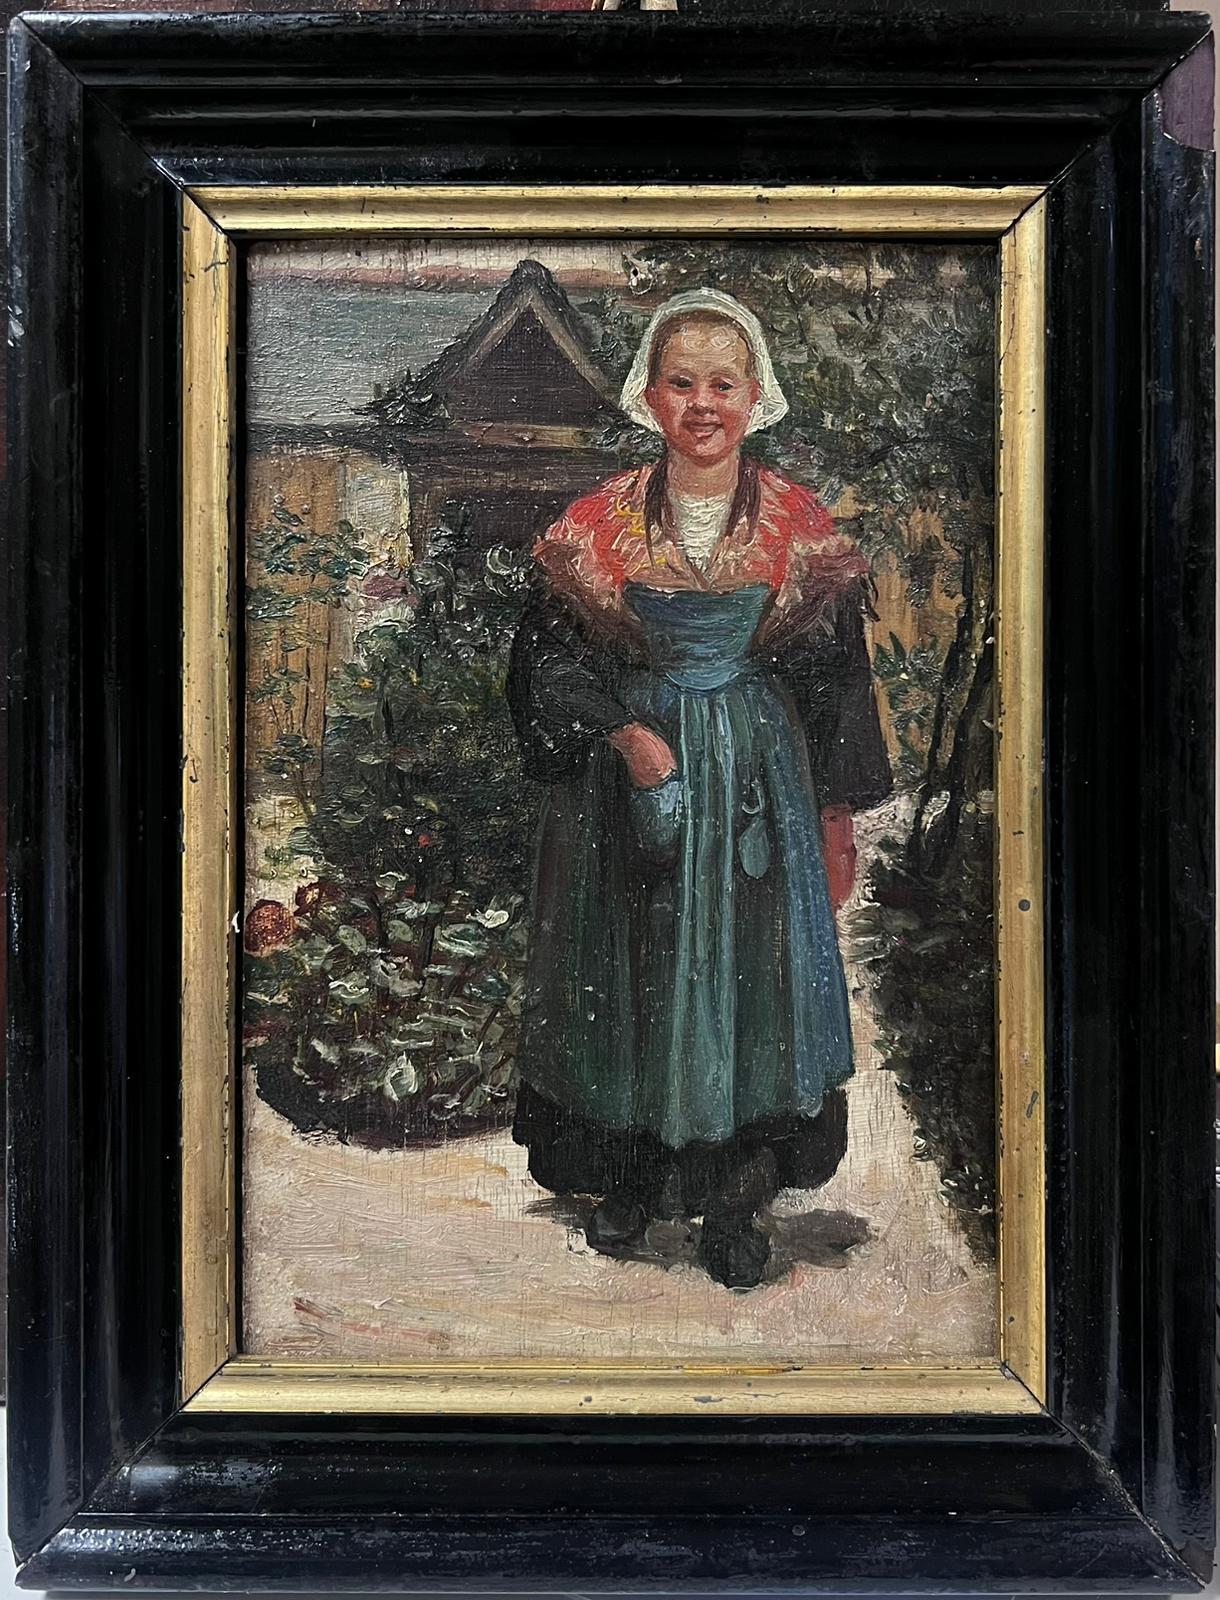 Portrait of a Country Lady
Dutch Impressionist, late 19th century
oil on wood - looks like a cigar box lid?
framed
framed: 11 x 8.5 inches
board: 8.5 x 6 inches
provenance: private collection, France
condition: a few minor scuffs but overall good